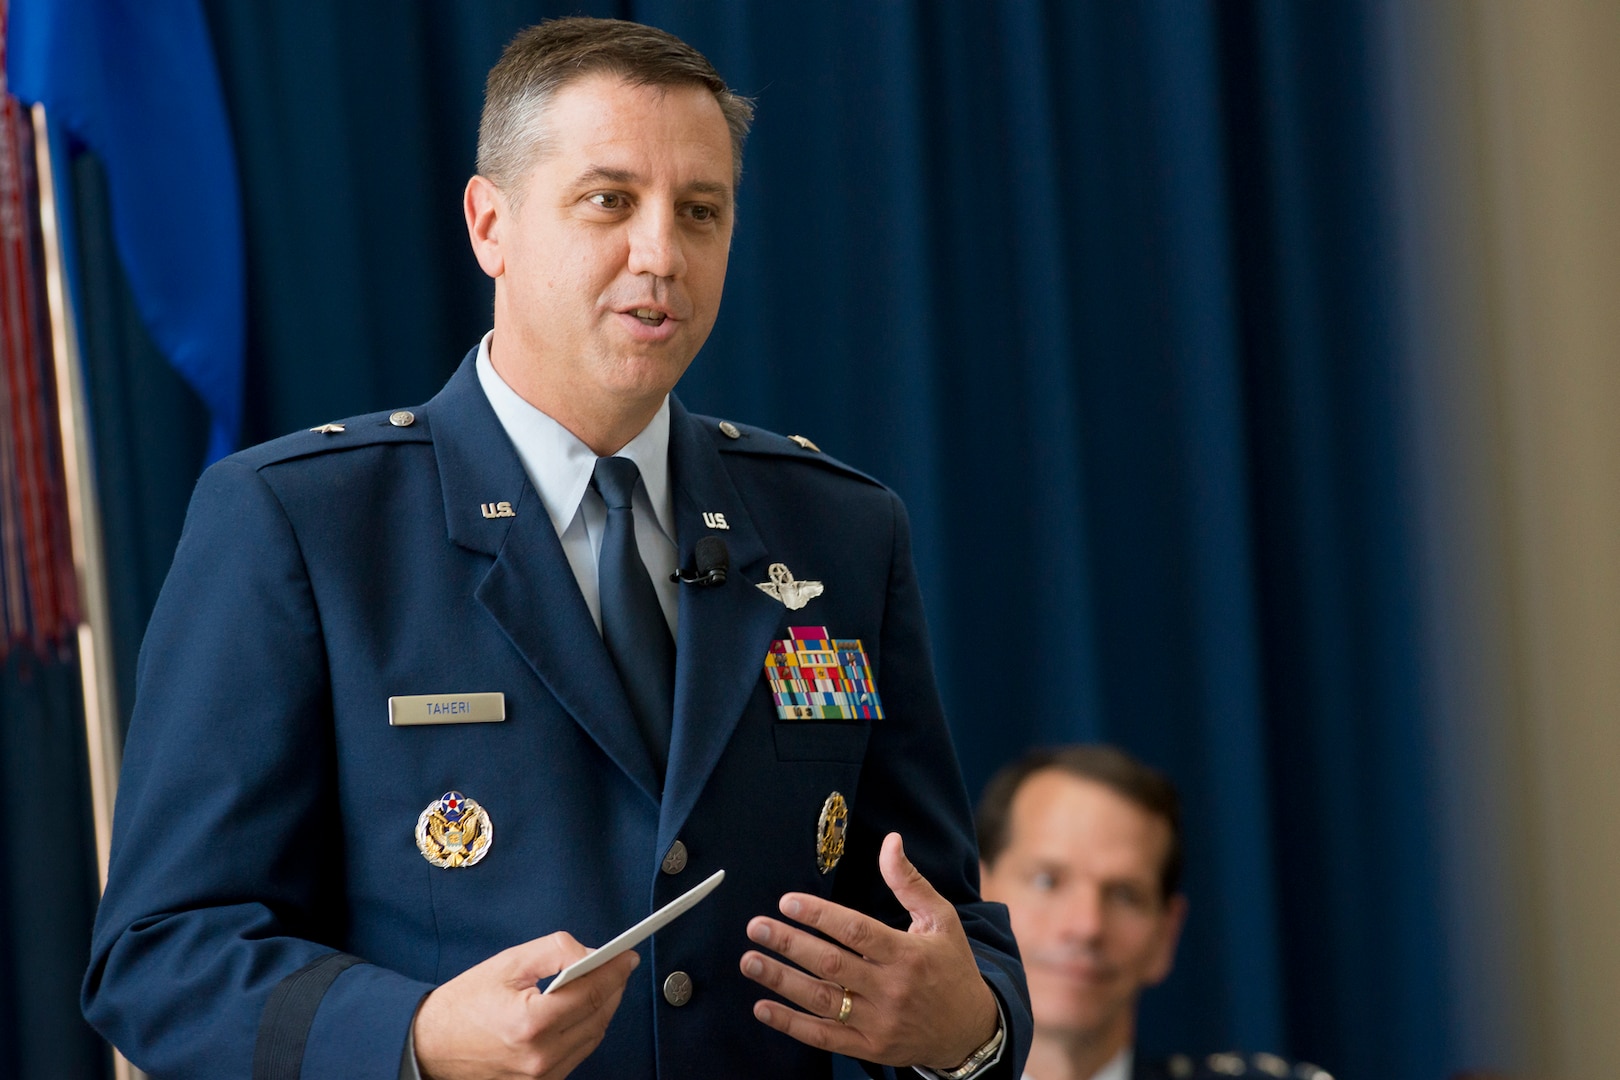 Brig. Gen. Michael R. Taheri, commander of the Air National Guard Readiness Center, assumes command of the ANGRC from Lt. Gen. Stanley E. Clarke III, the director of the ANG, during an assumption of command ceremony June 16, 2014.